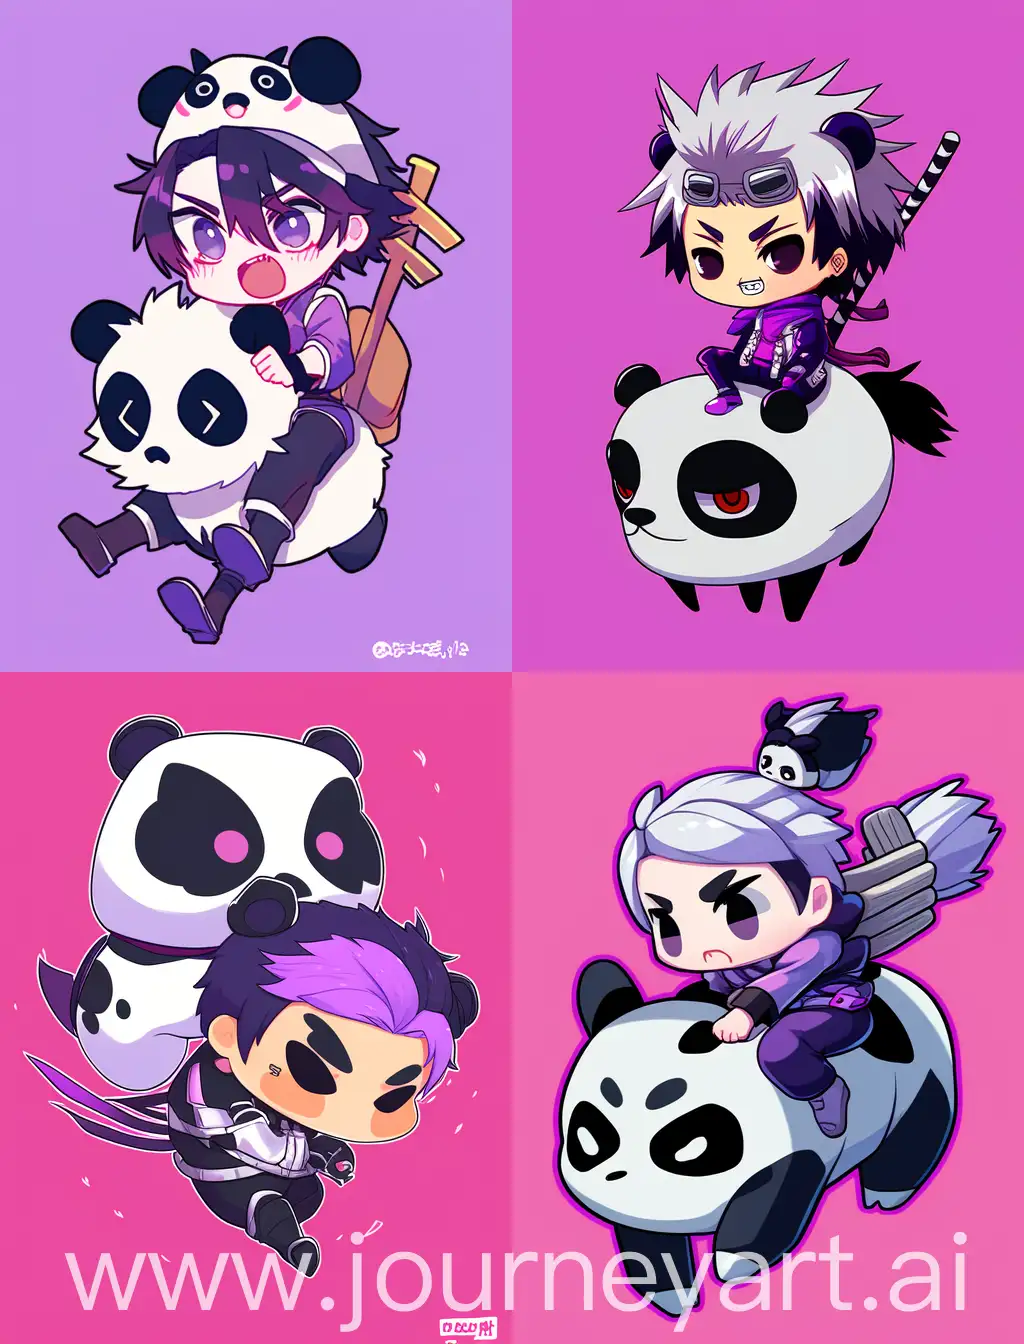 angry chibi anime guy riding a panda, cartoon anime style, with strong lines, with purple solid background